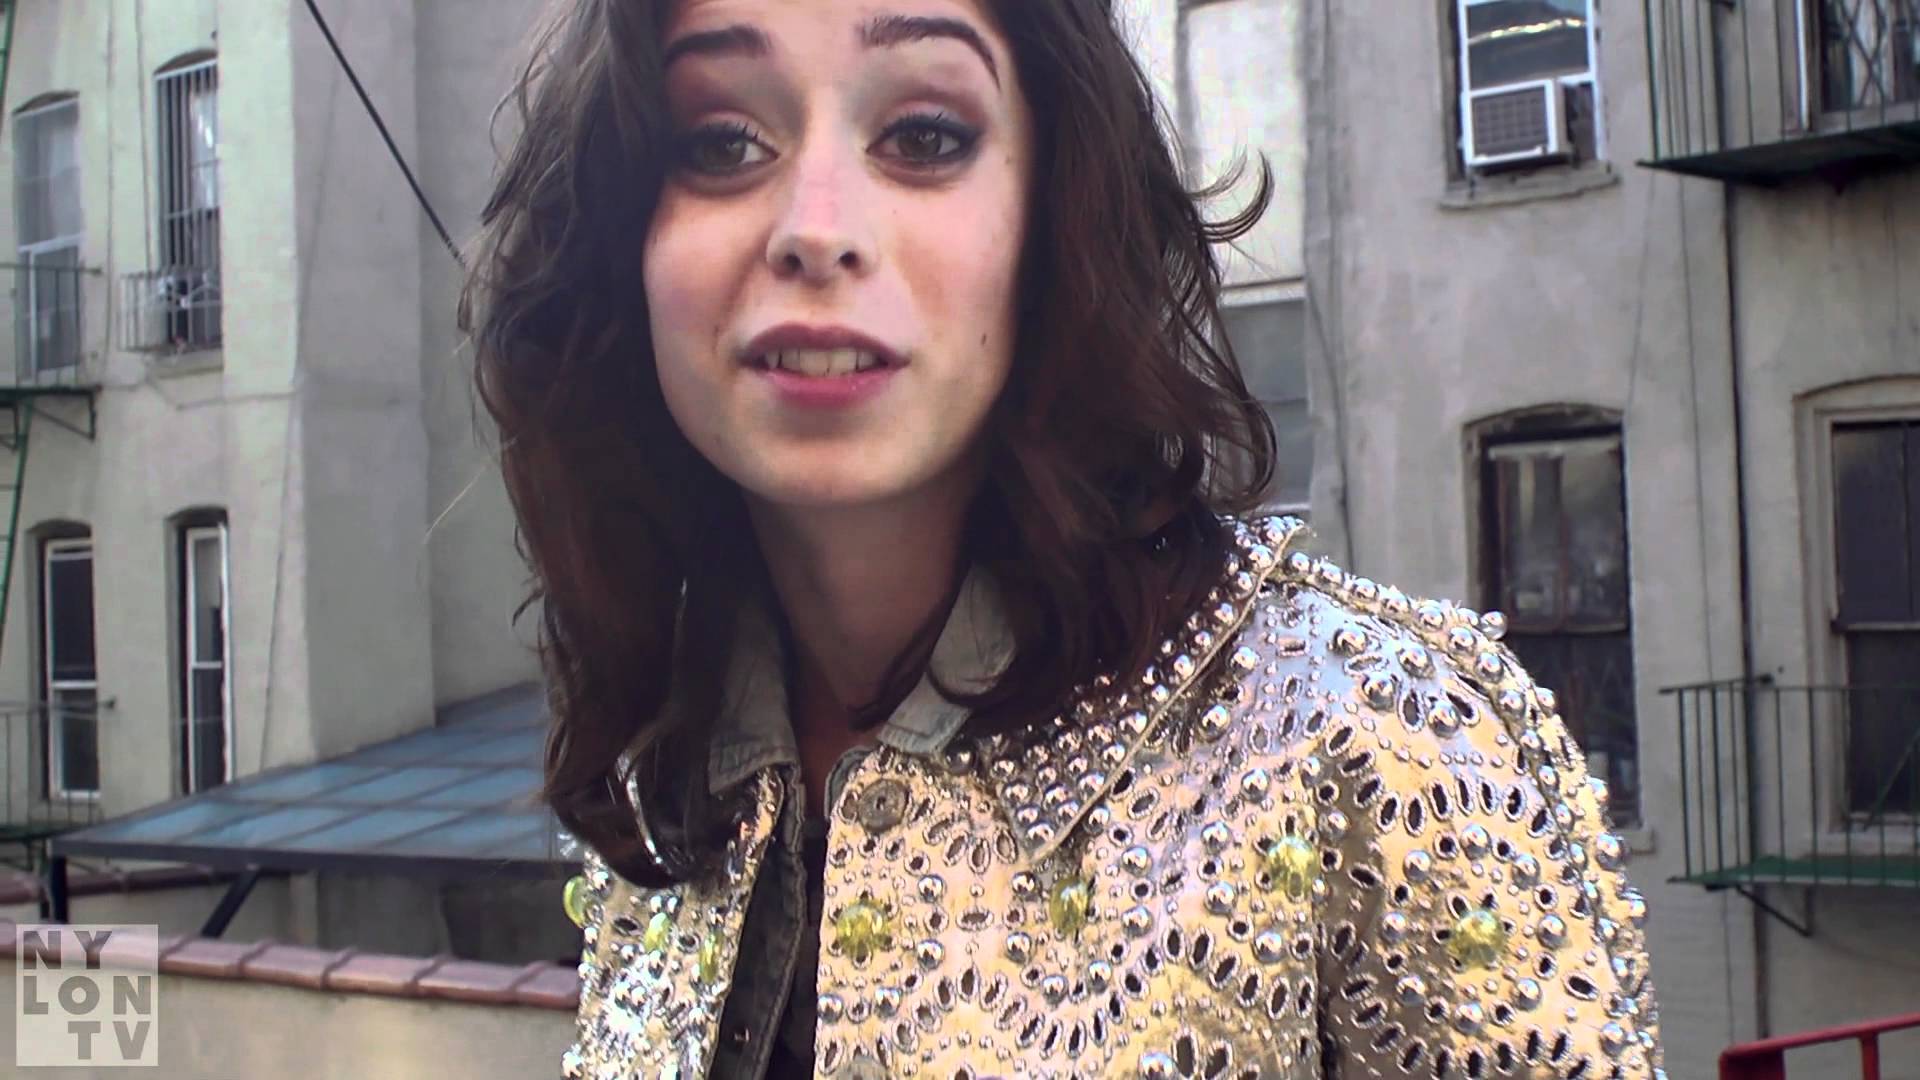 Cristin Milioti Wiki: Young, Photo, Ethnicity & Gay or Straight